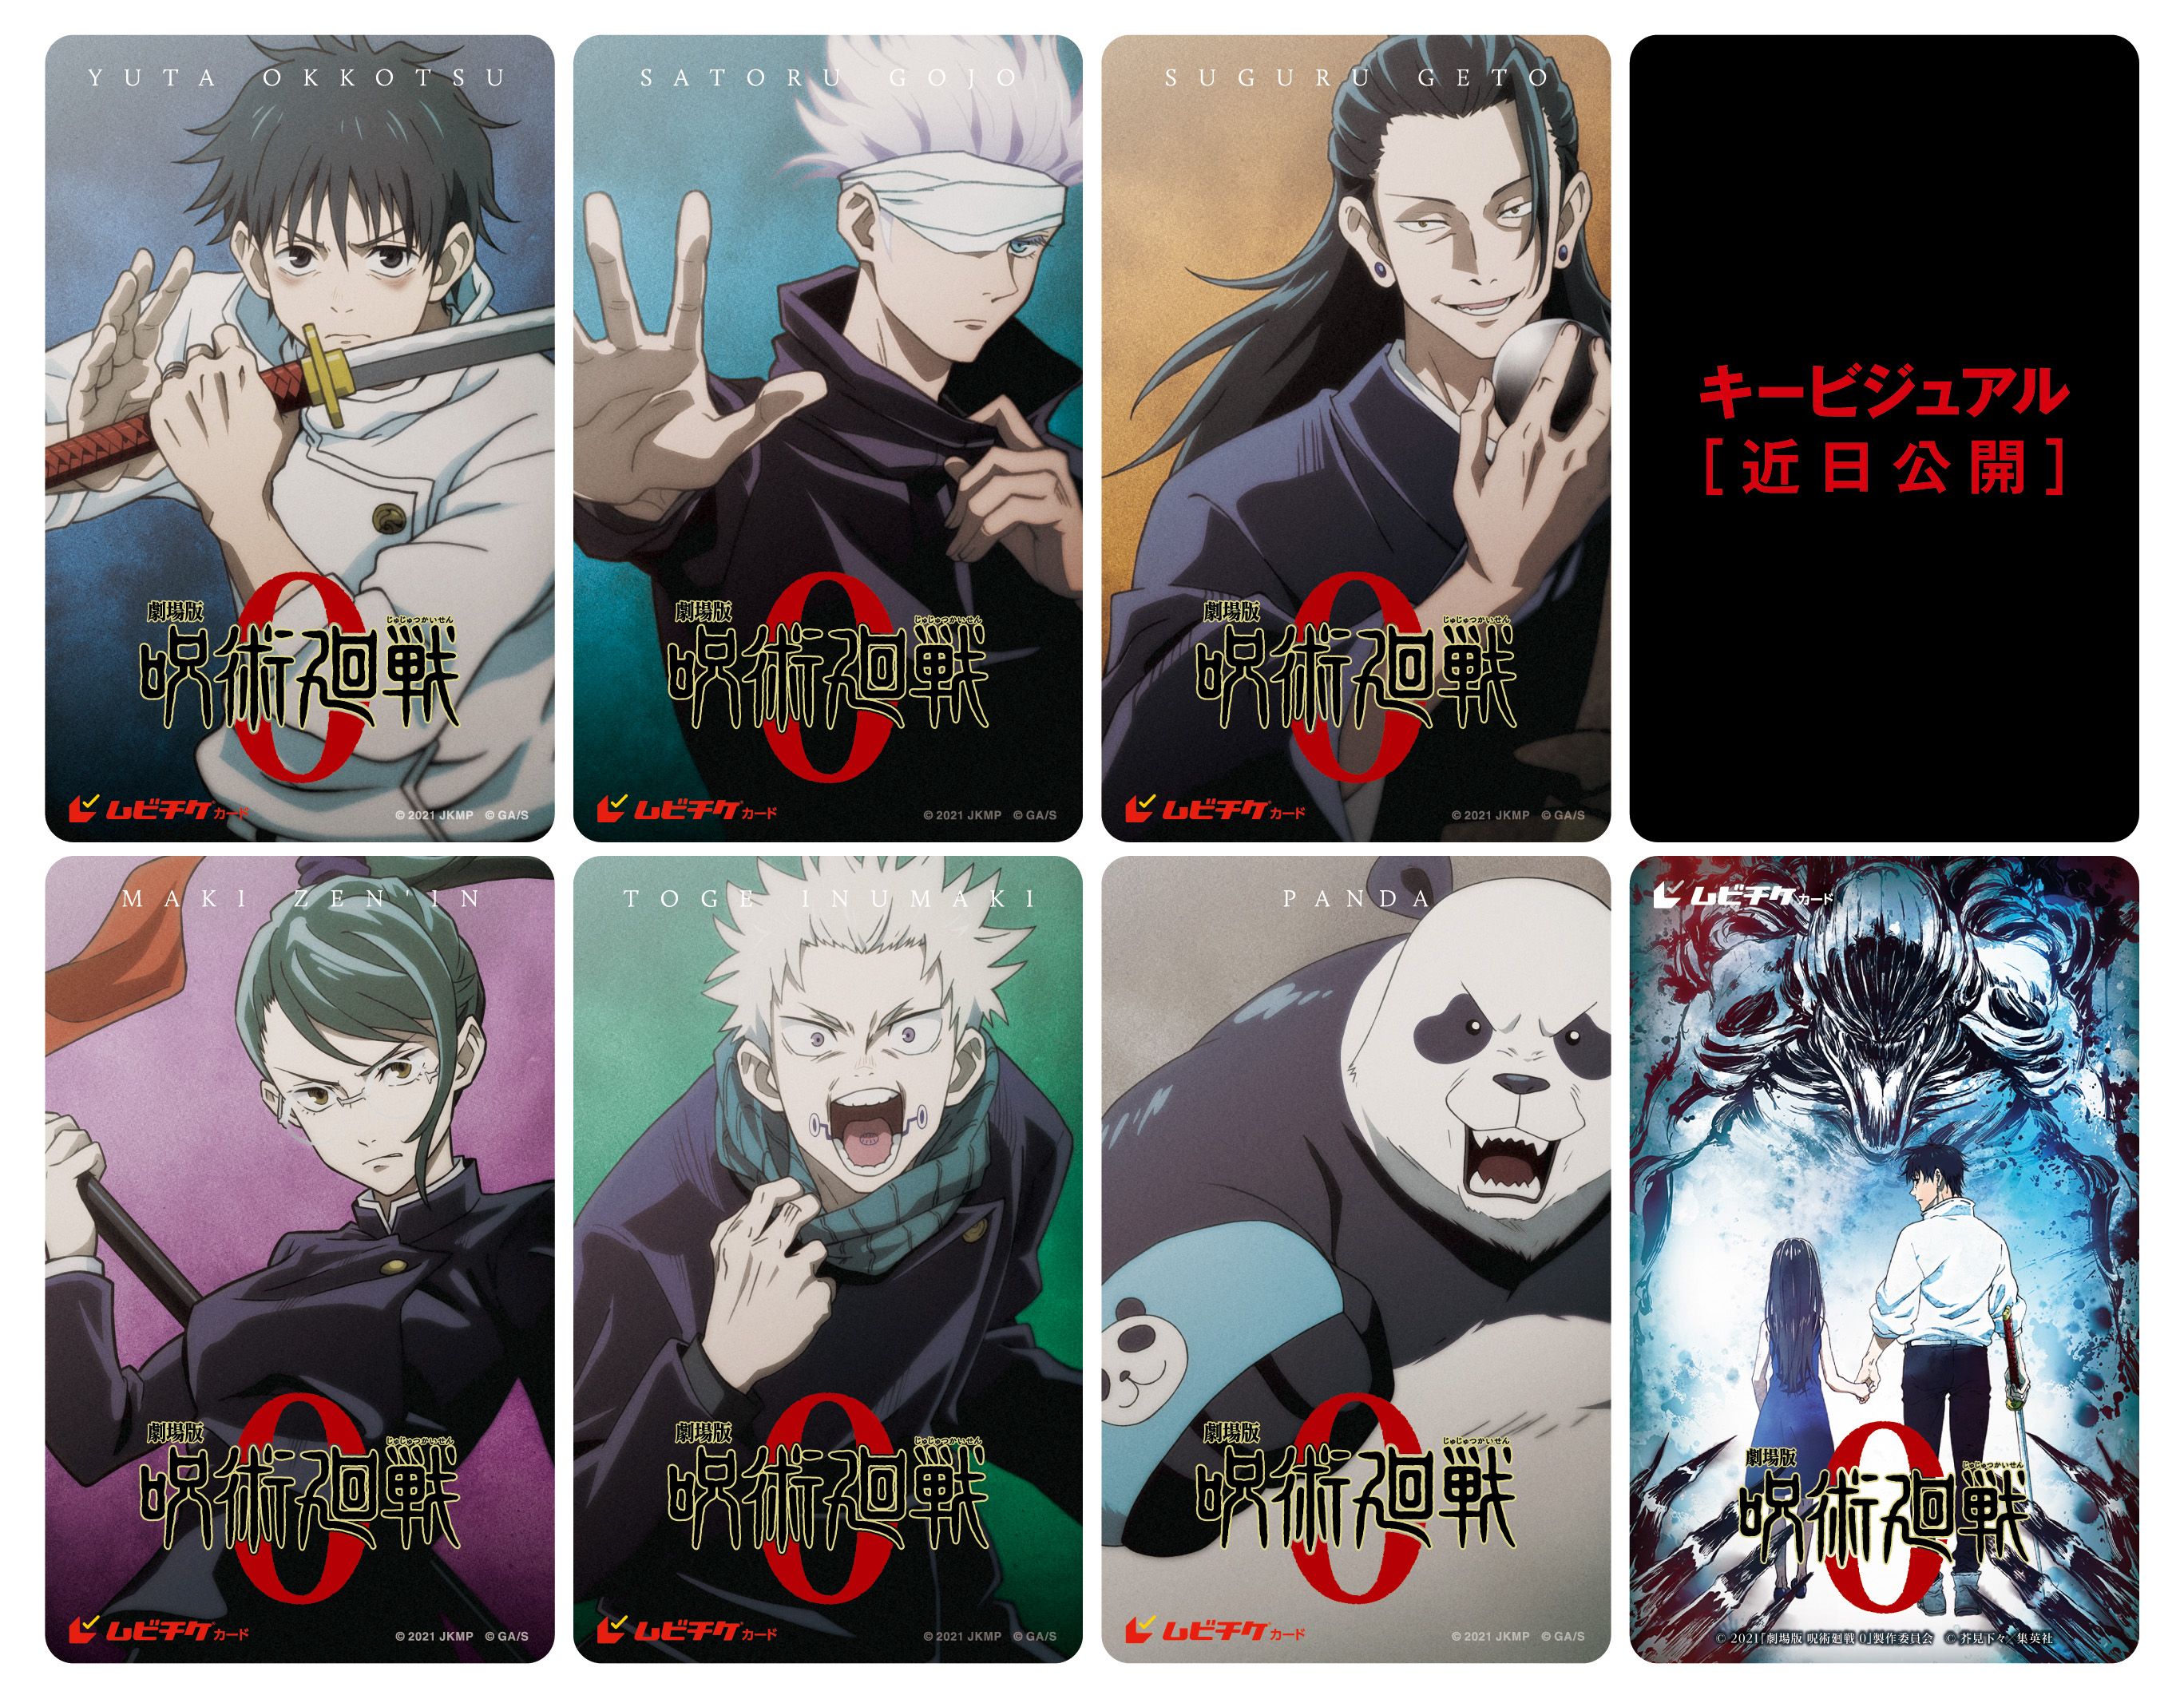 Art for the preorder tickets for Jujutsu Kaisen 0 in Japan